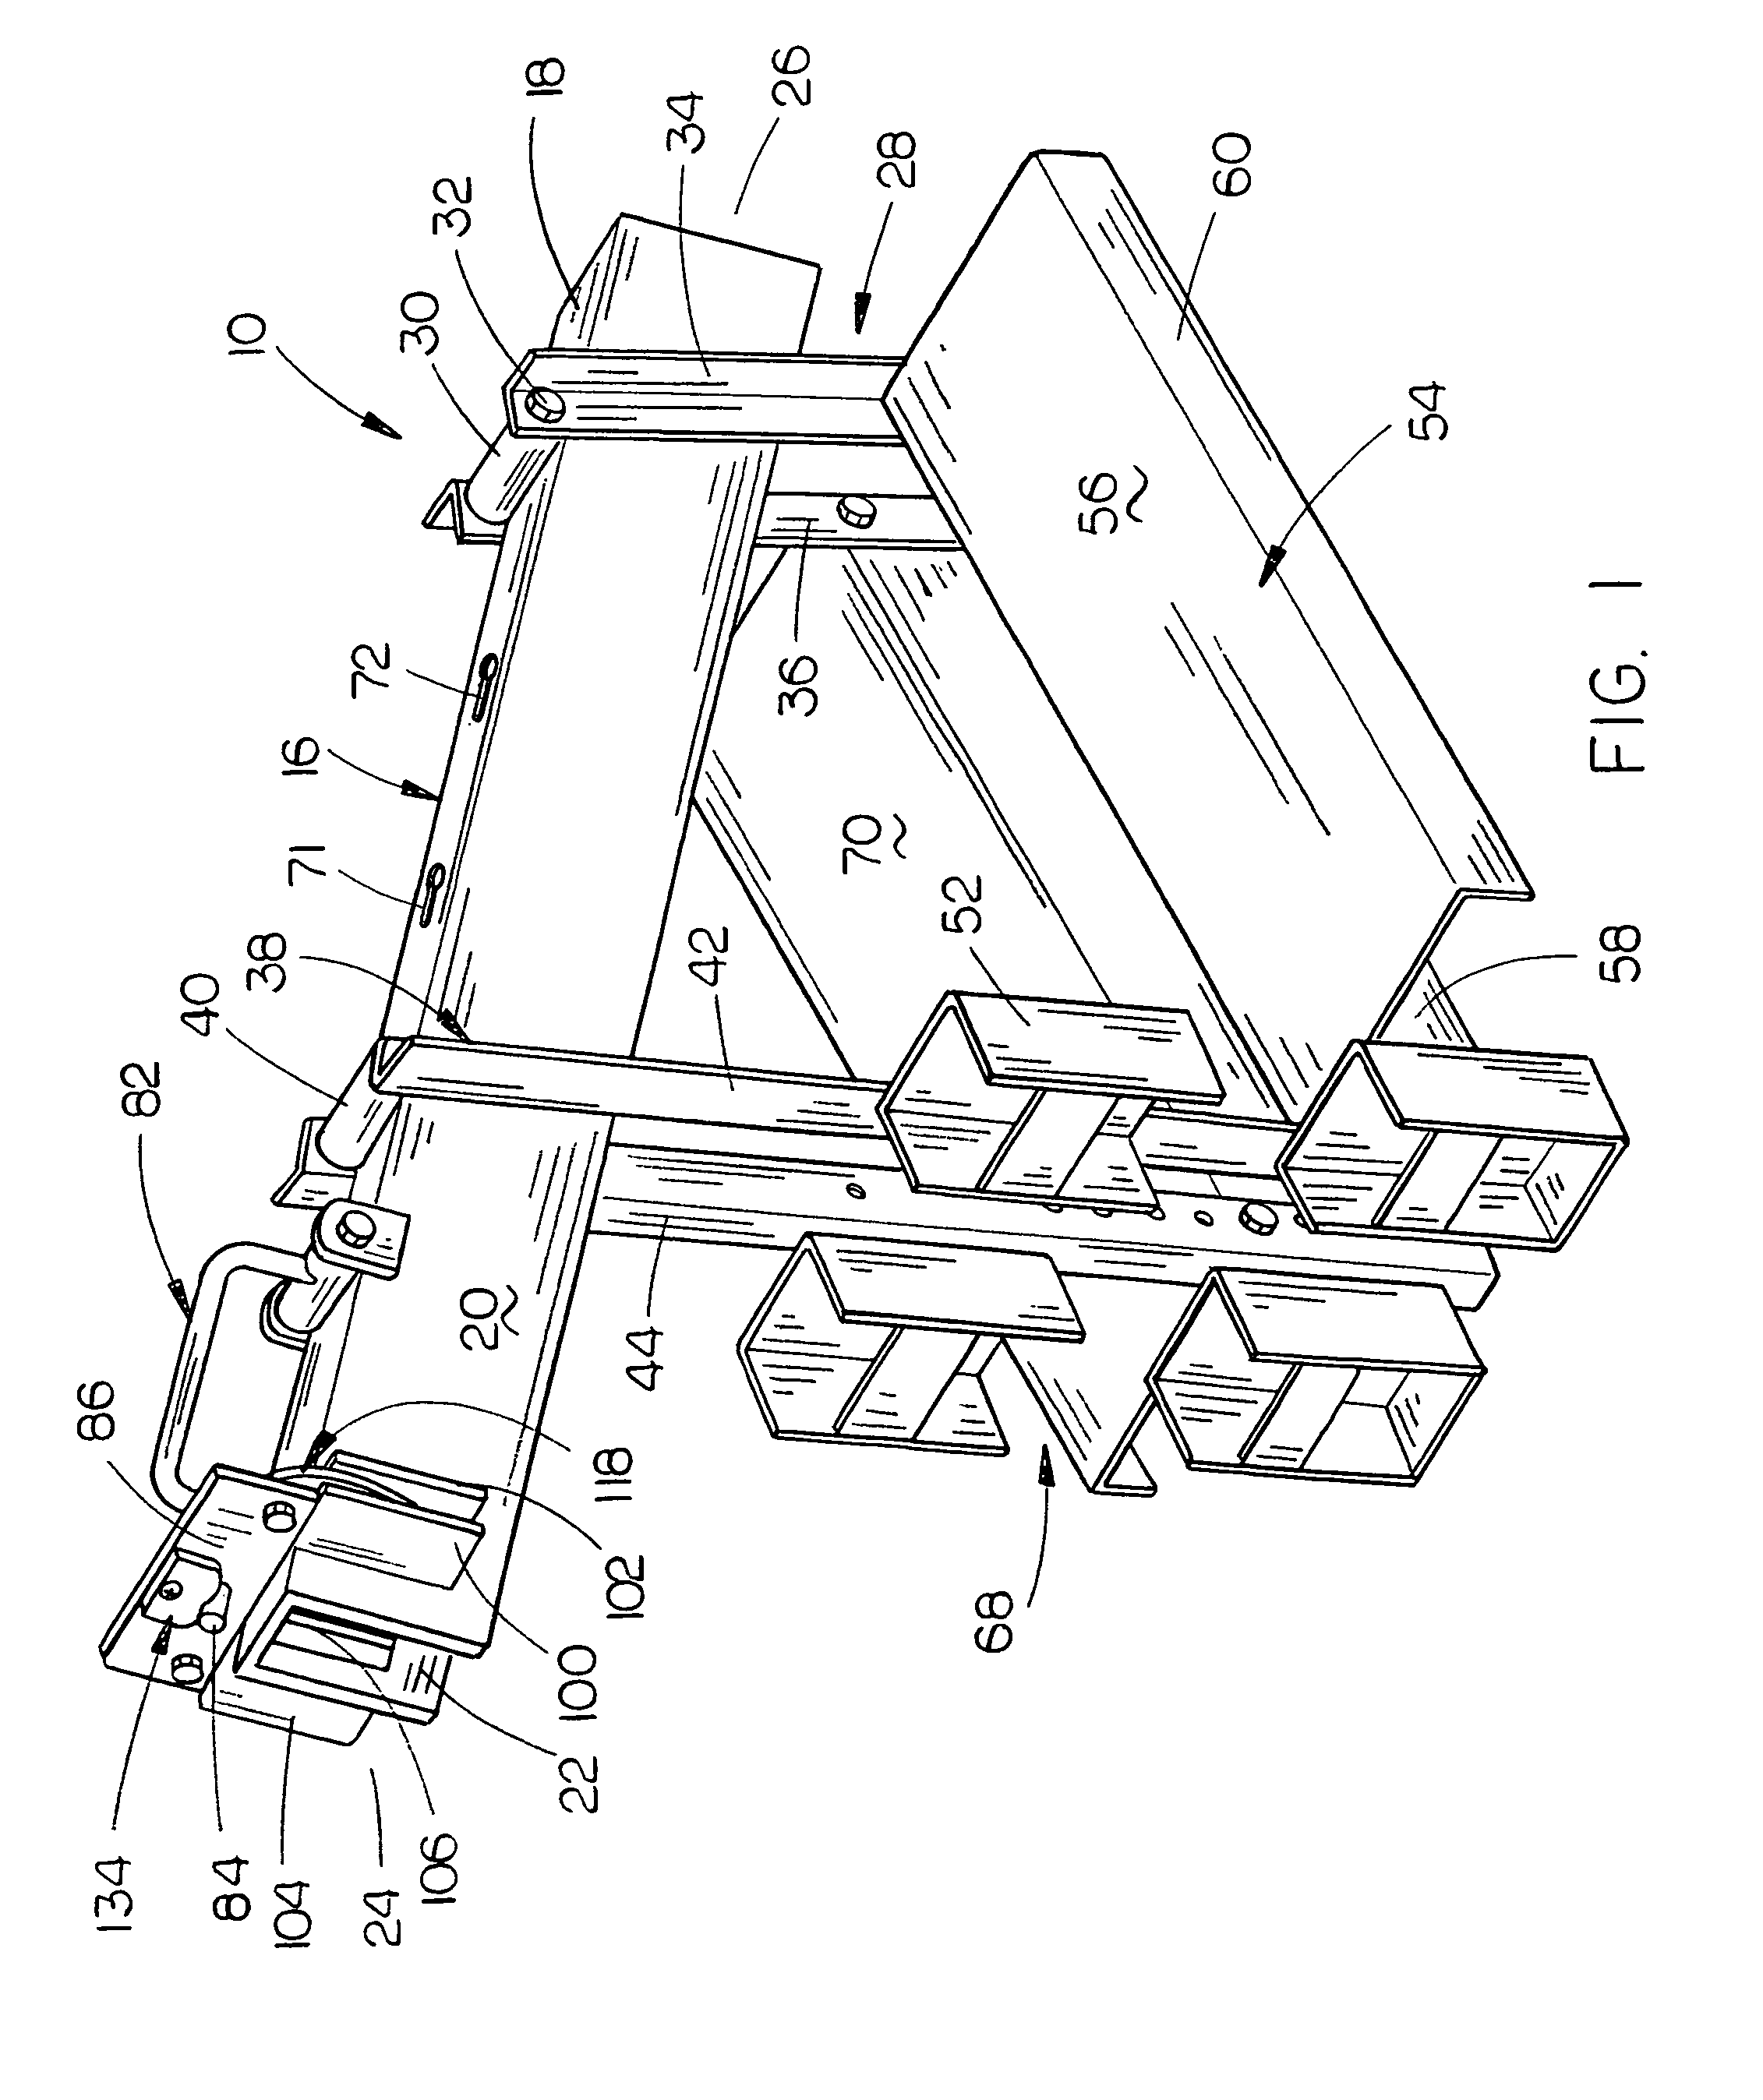 Apparatus for supporting a worker on an upper chord of a roof truss